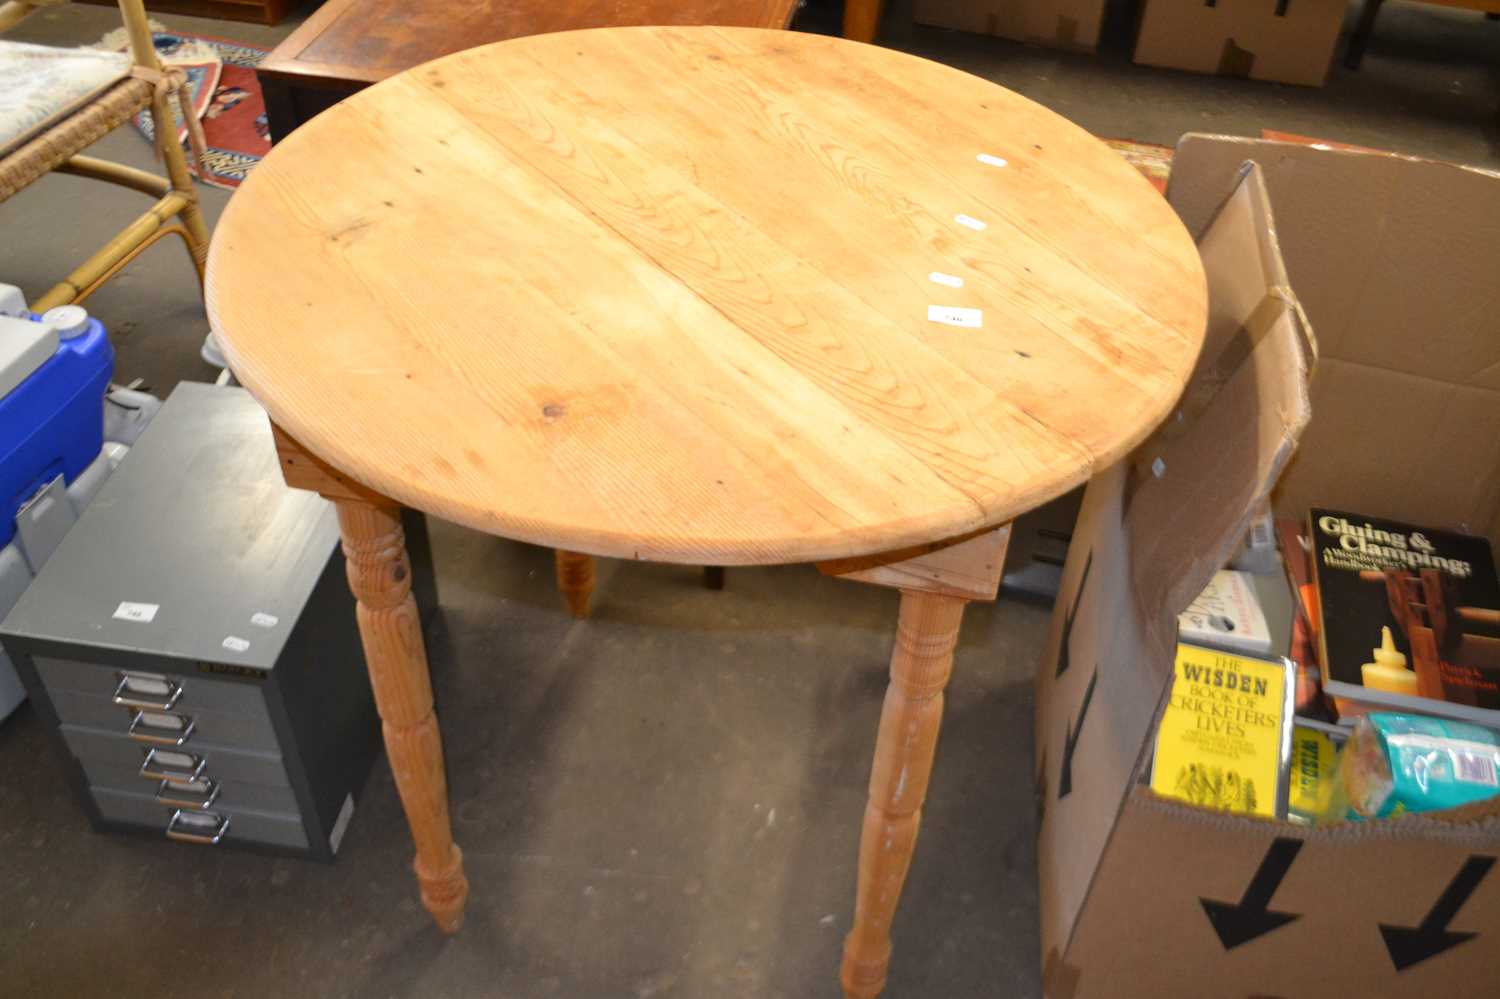 Round pine topped kitchen table, 79cm